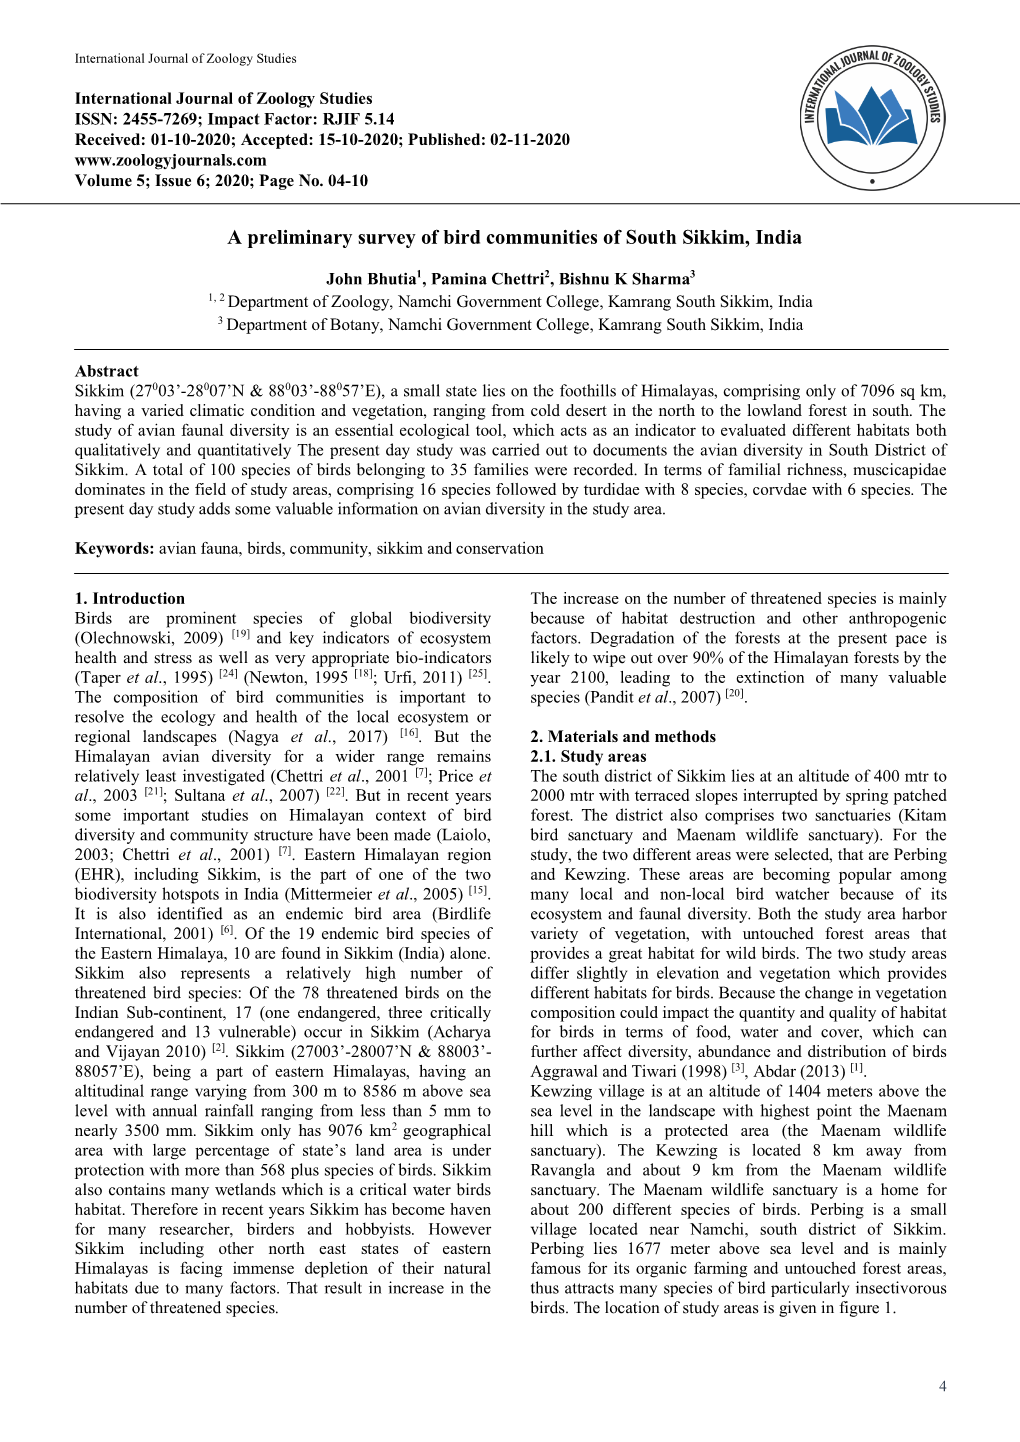 A Preliminary Survey of Bird Communities of South Sikkim, India